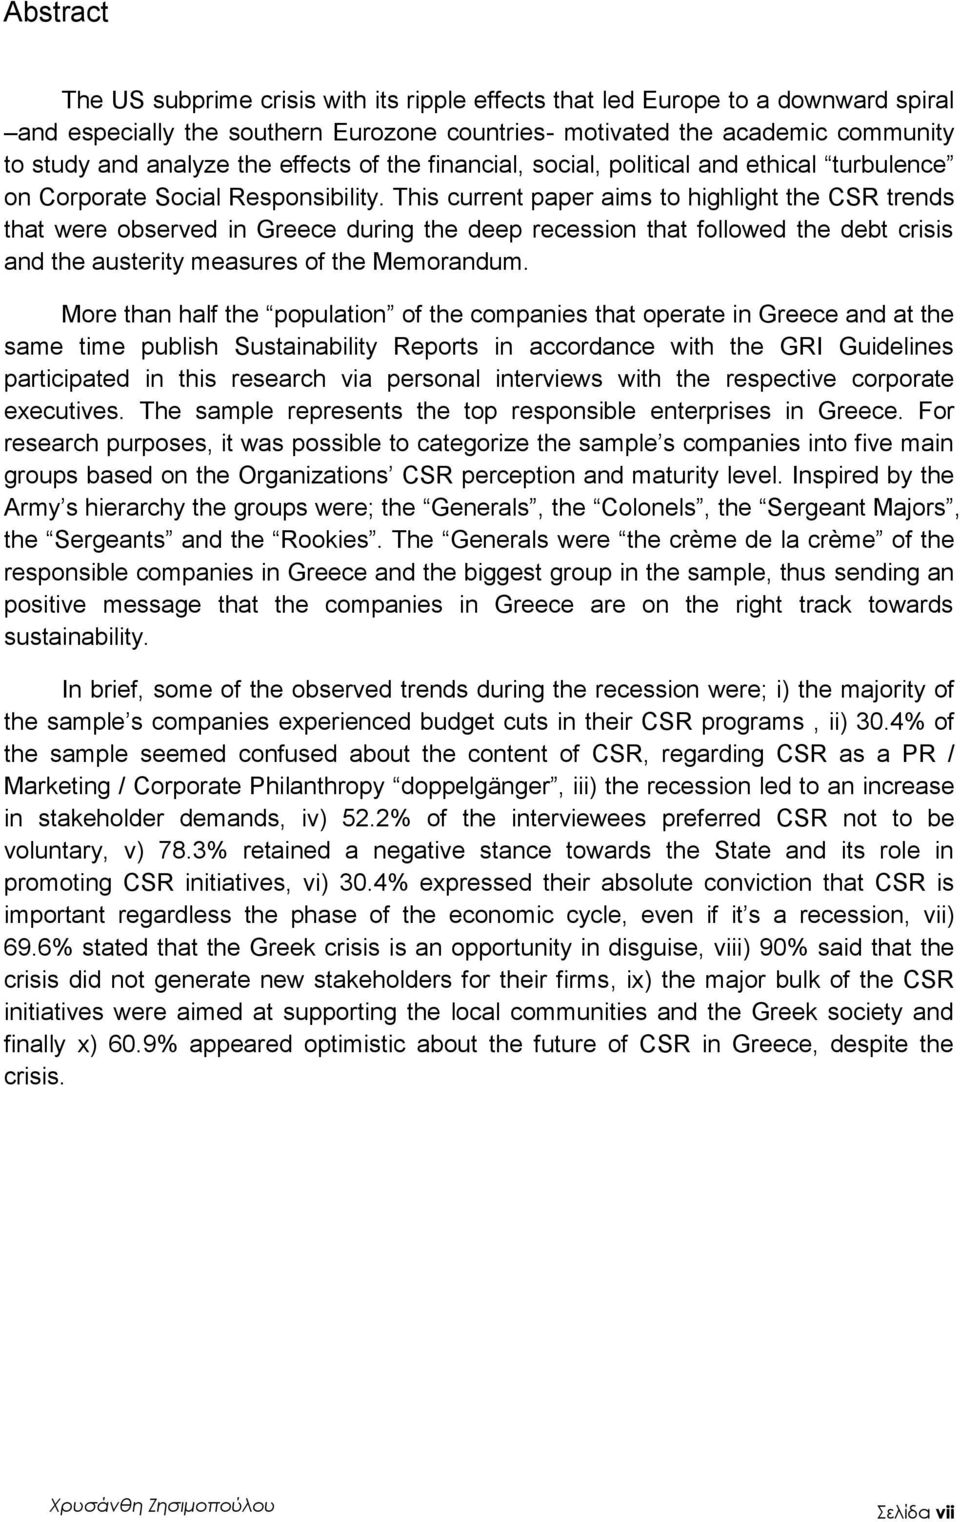 This current paper aims to highlight the CSR trends that were observed in Greece during the deep recession that followed the debt crisis and the austerity measures of the Memorandum.